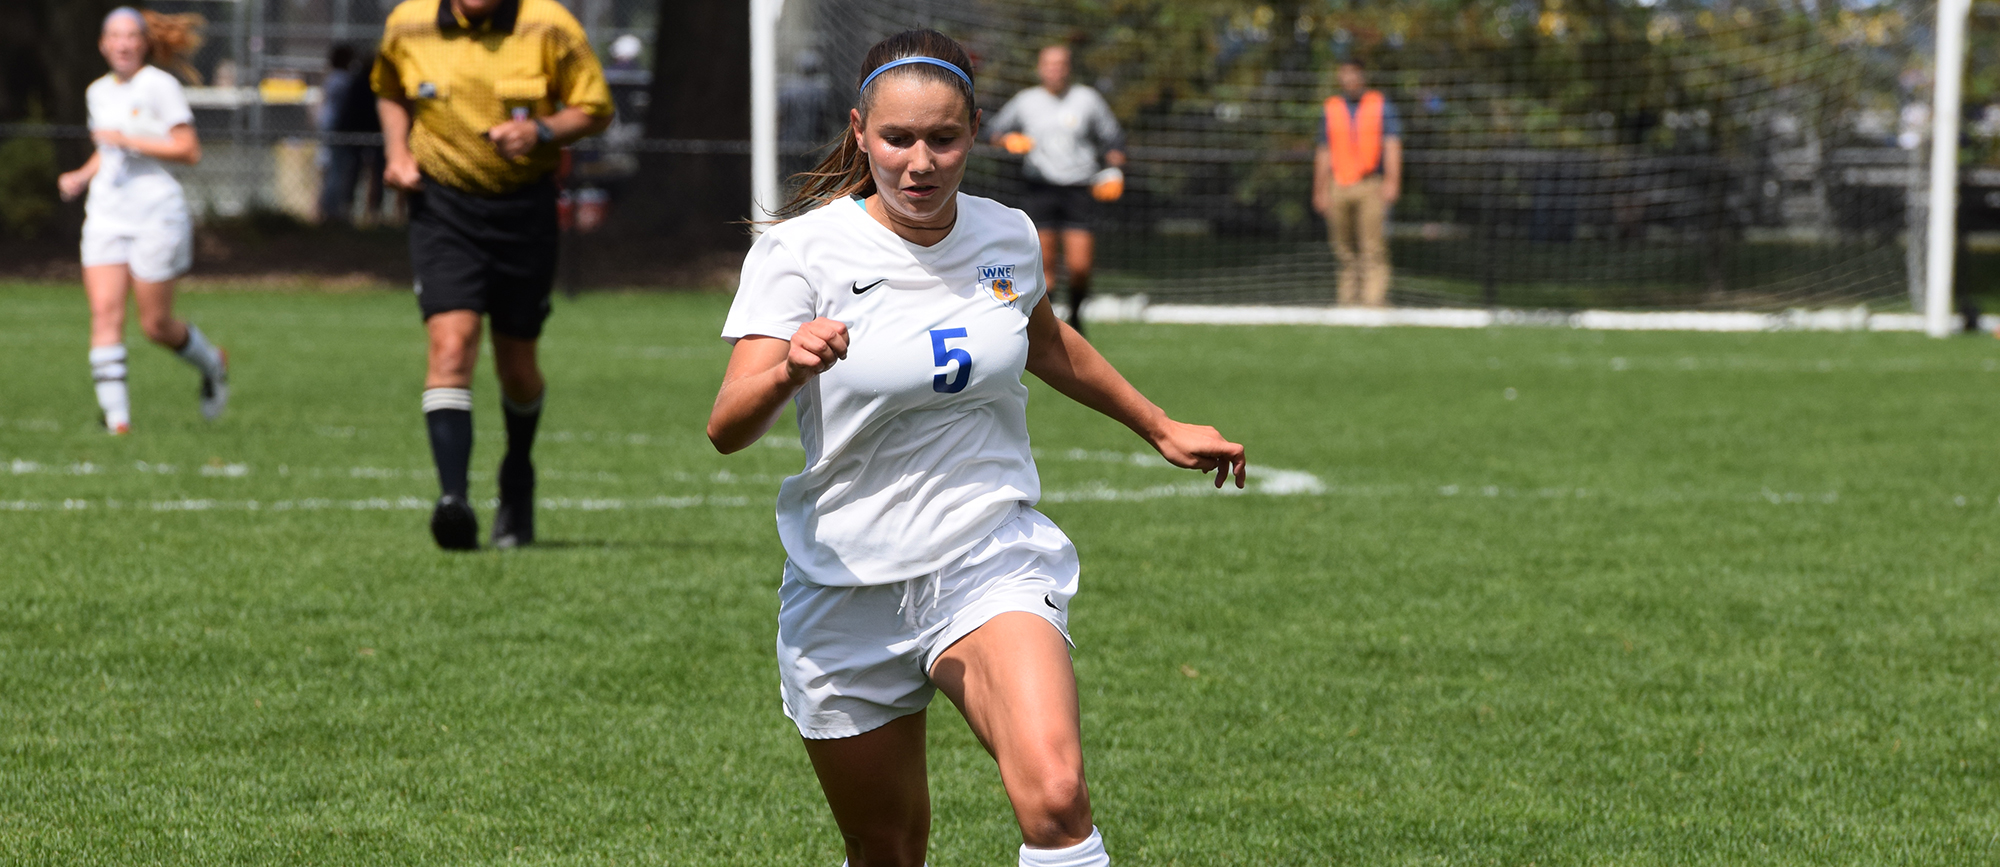 Senior Brooke Labrie scored her second goal of the season in Western New England's 2-0 victory over UNE in the CCC quarterfinals on Saturday.